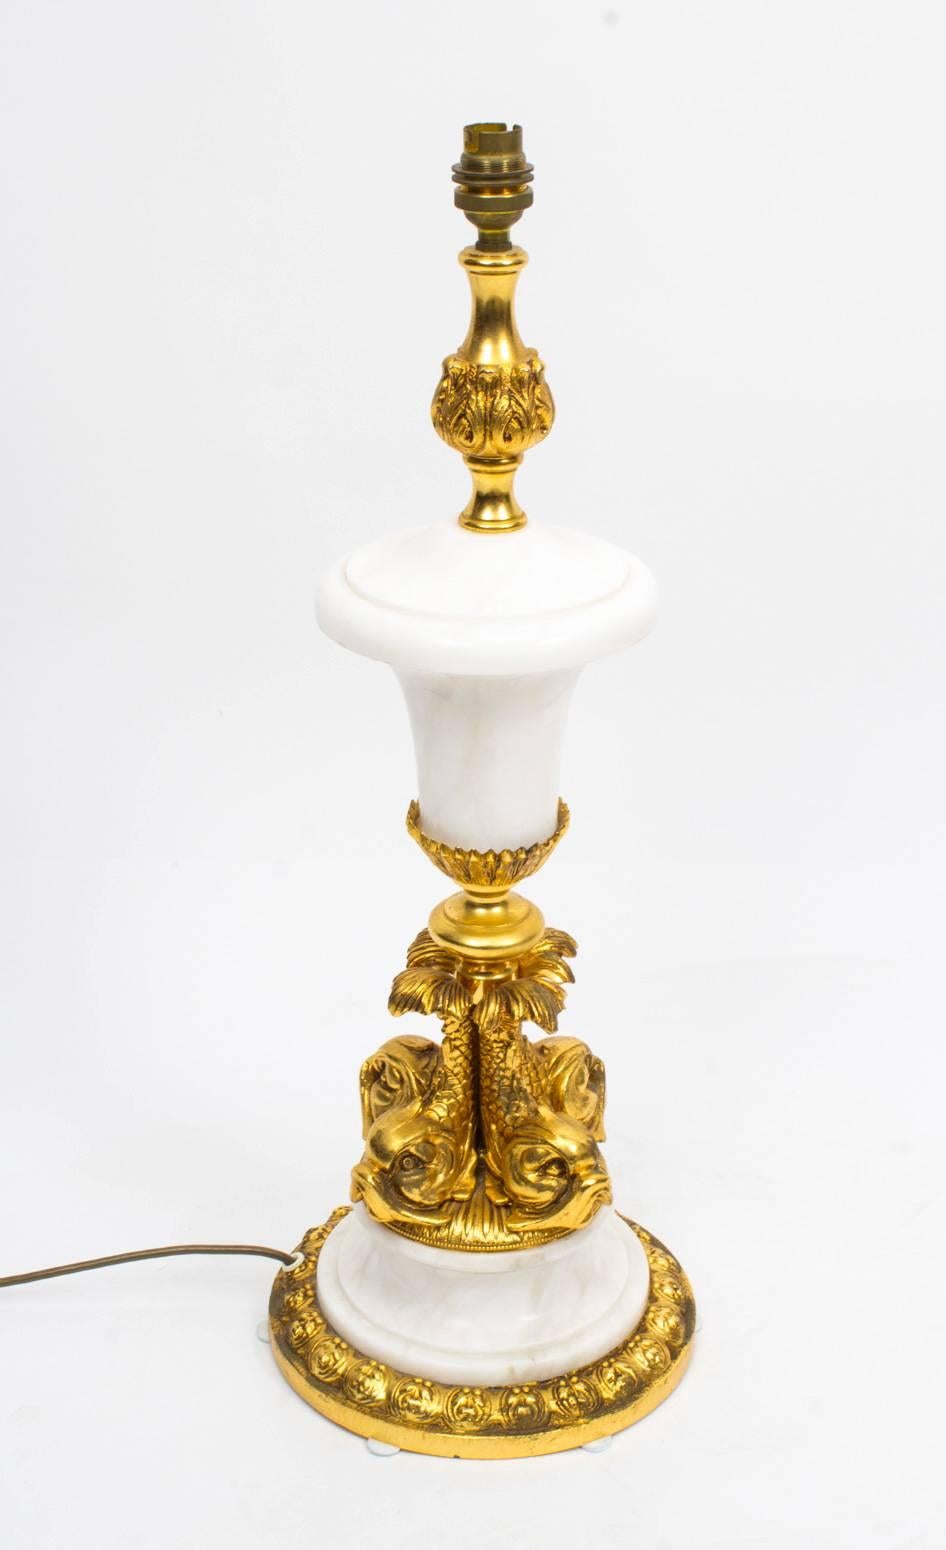 This is a truly superb large white marble and ormolu Louis Revival table lamp, dating from the last quarter of the 20th century.

The central column stands on four ormolu dolphins raised on a marble socle that rests on an ormolu base.

The